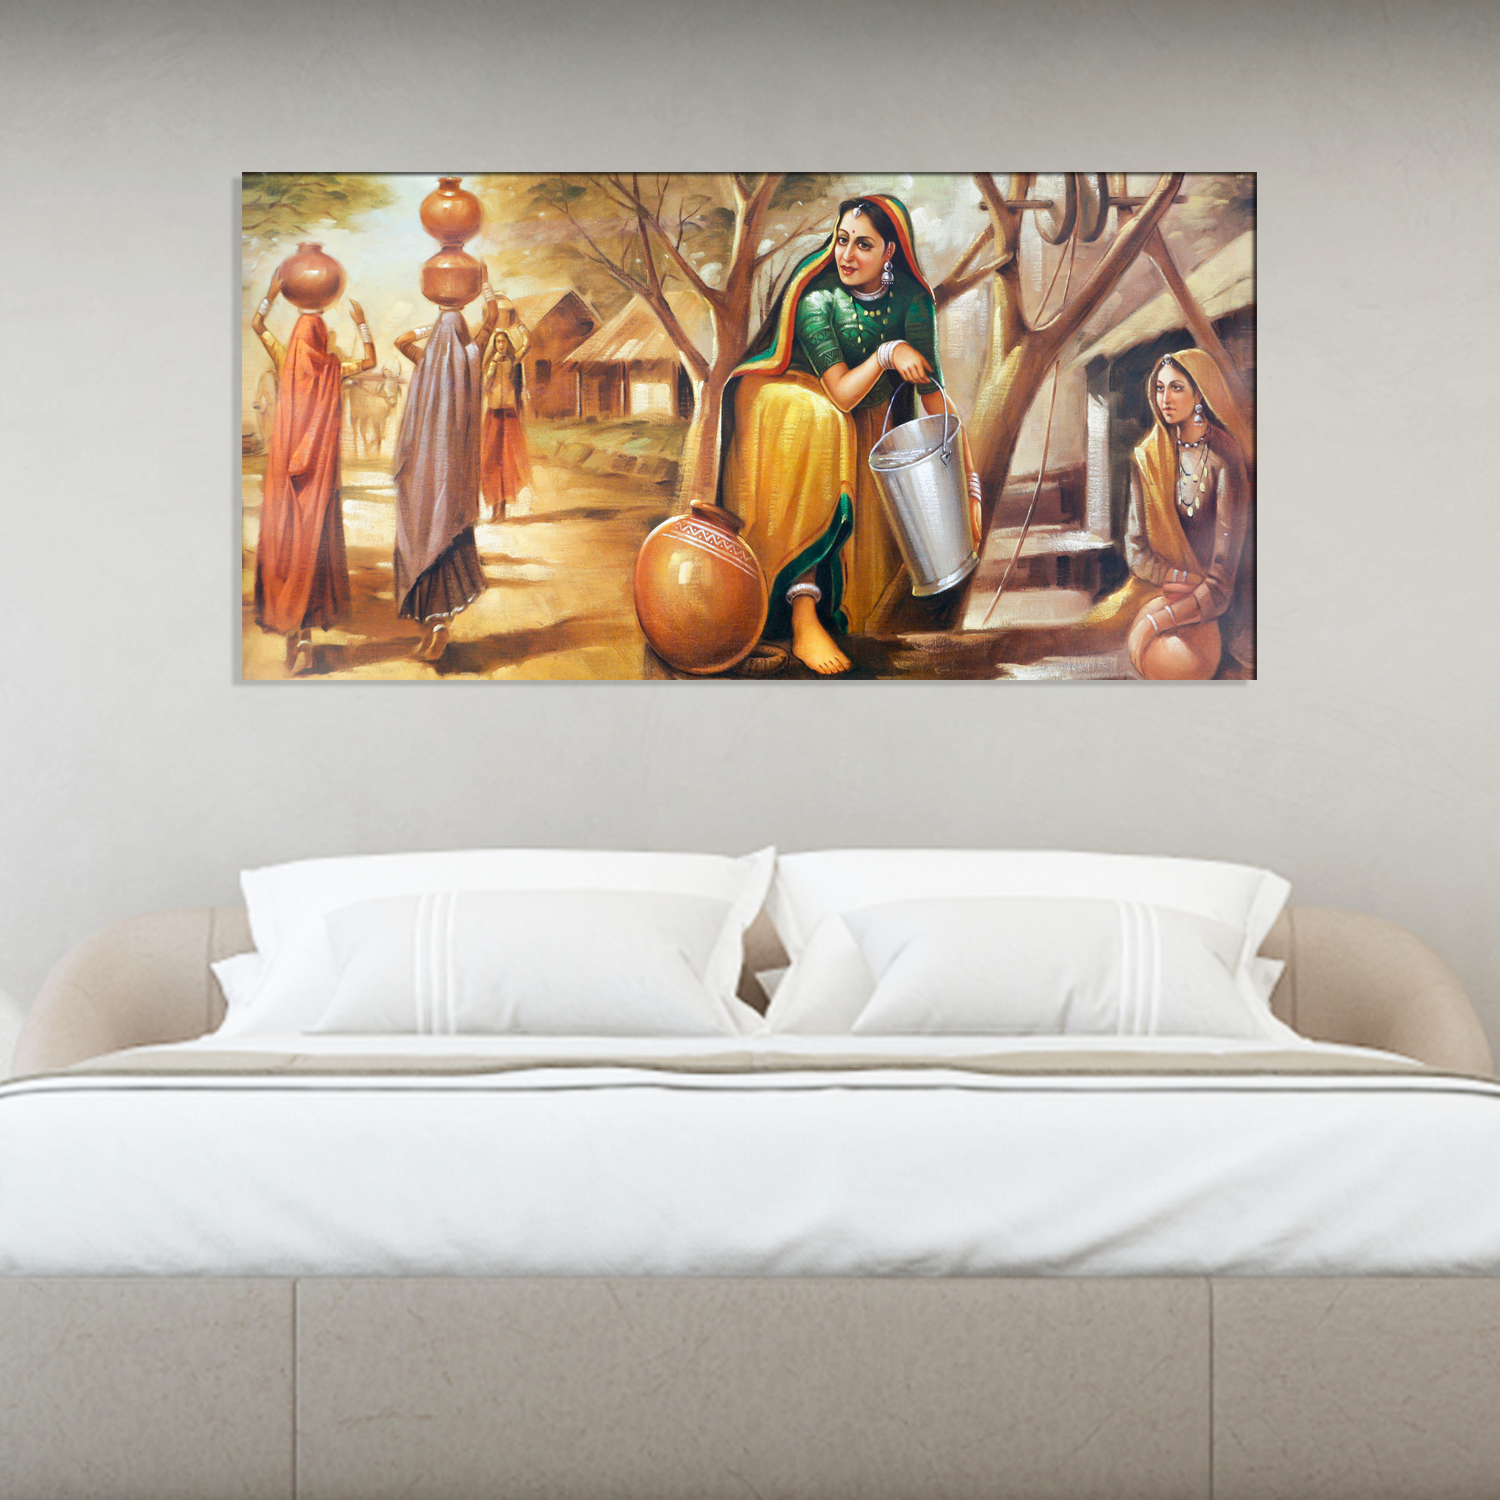 Woman Who is Filling Water in a Pot Abstract Canvas Print Wall Painting